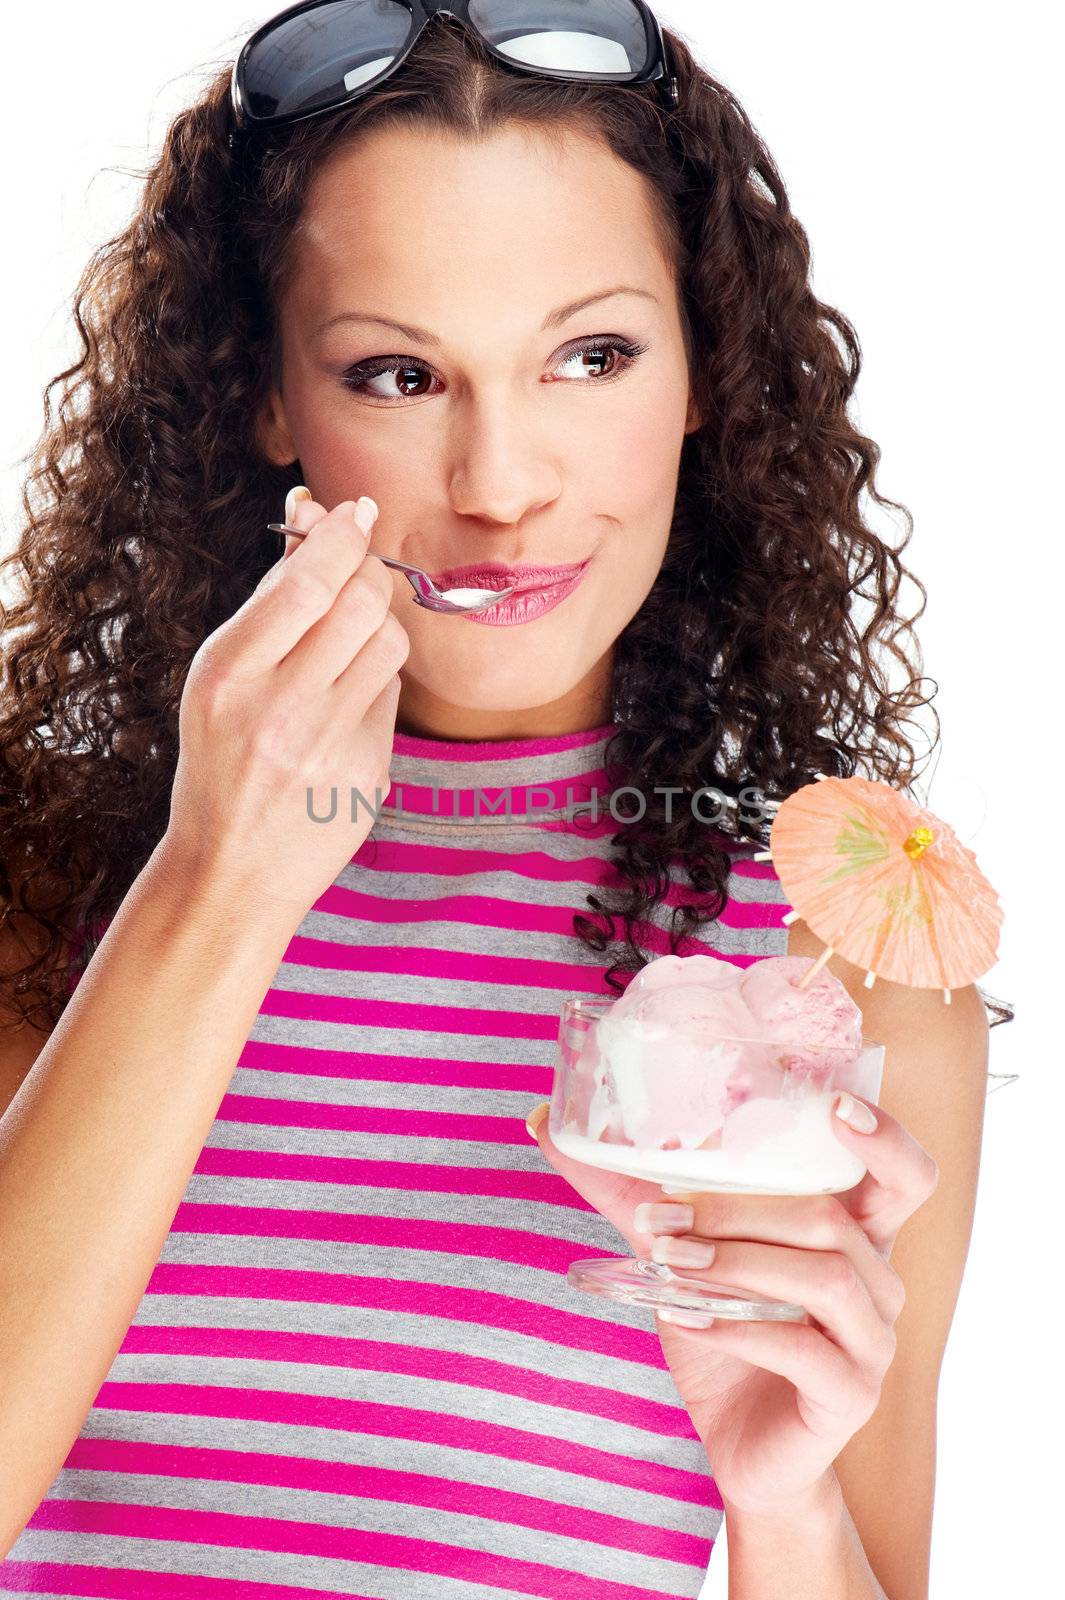 woman eating ice cream decorated with orange umbrella, wearing shirt with pink and gray horizontal stripes, isolated